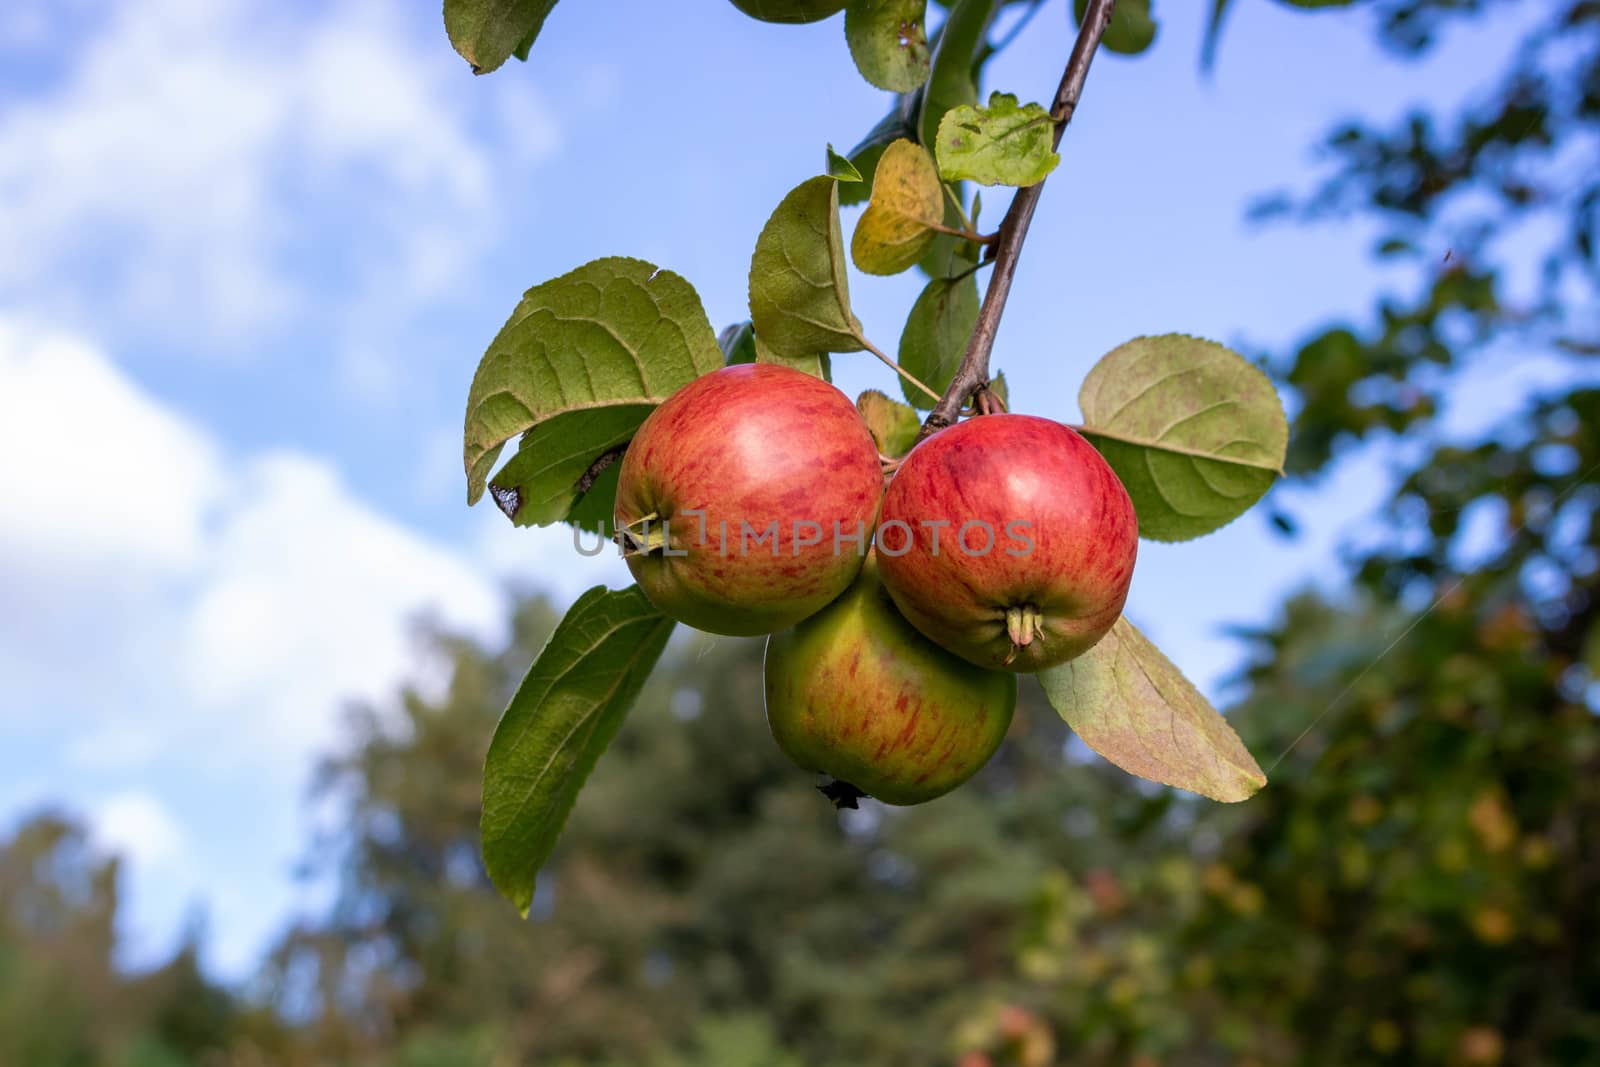 Three shiny delicious apples hanging from a tree branch in an Apple orchard against the sky on a Sunny autumn day